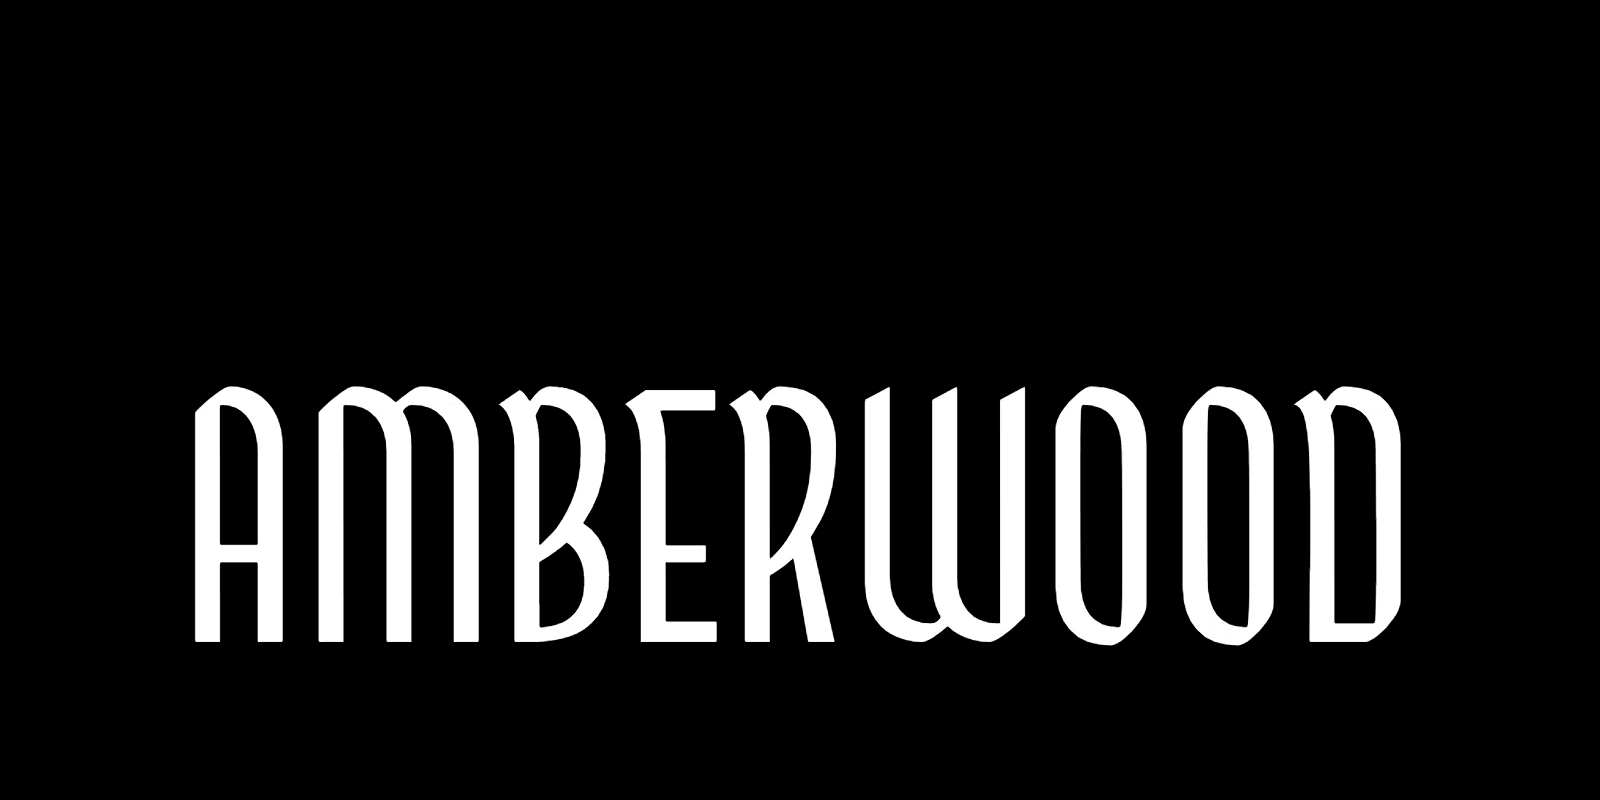 A demo of the variable version of Amberwood that has both a height and weight axis